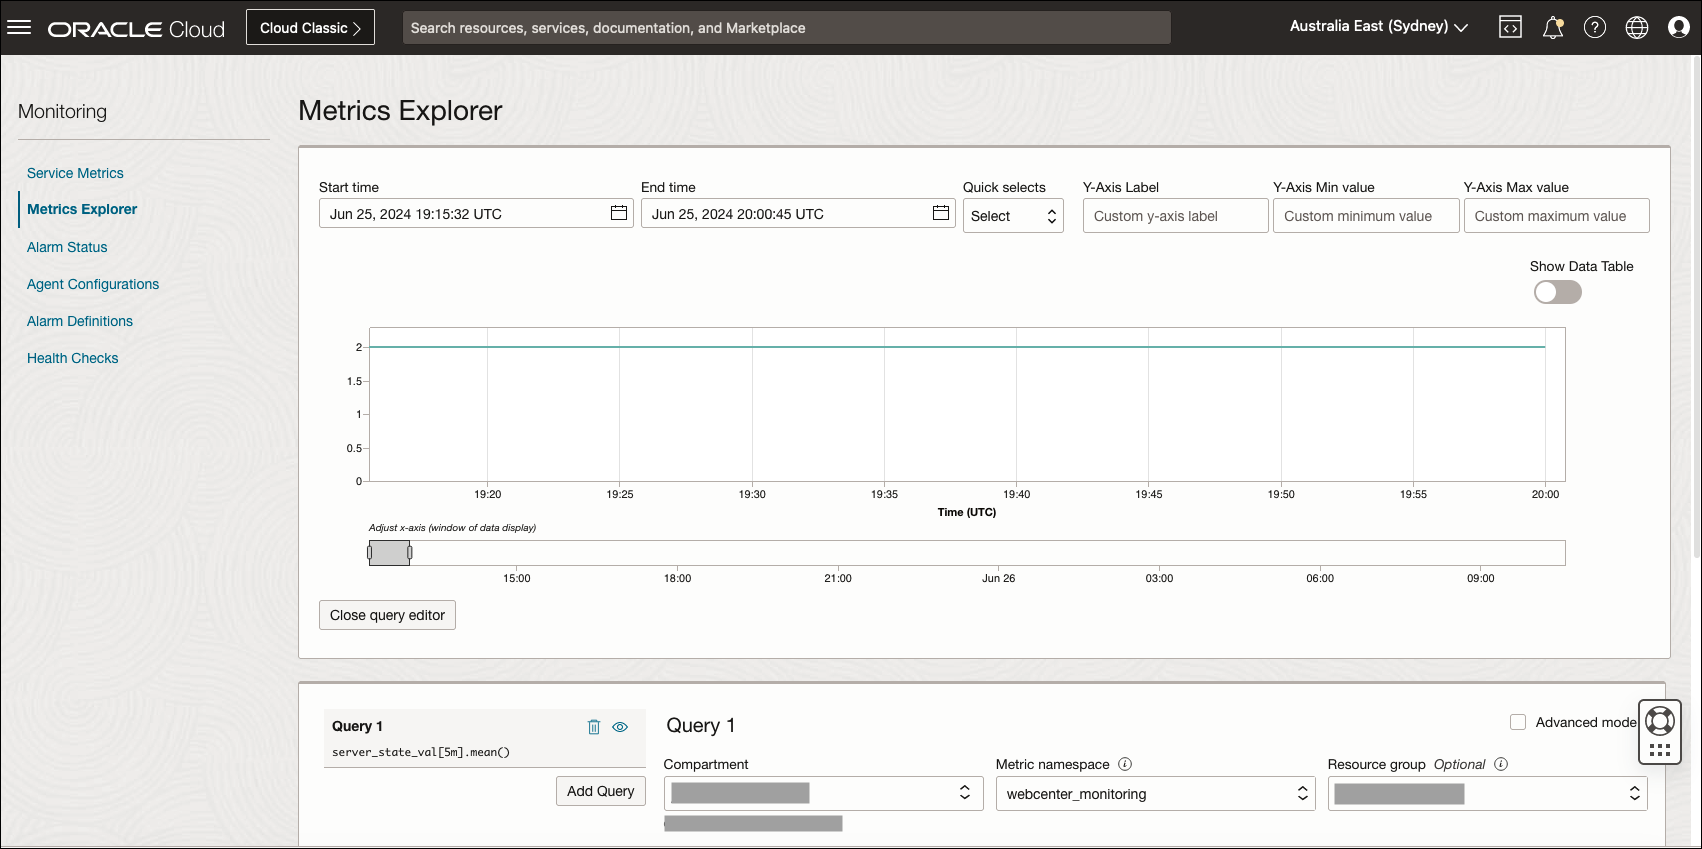 This image shows the Metrics Explorer page.